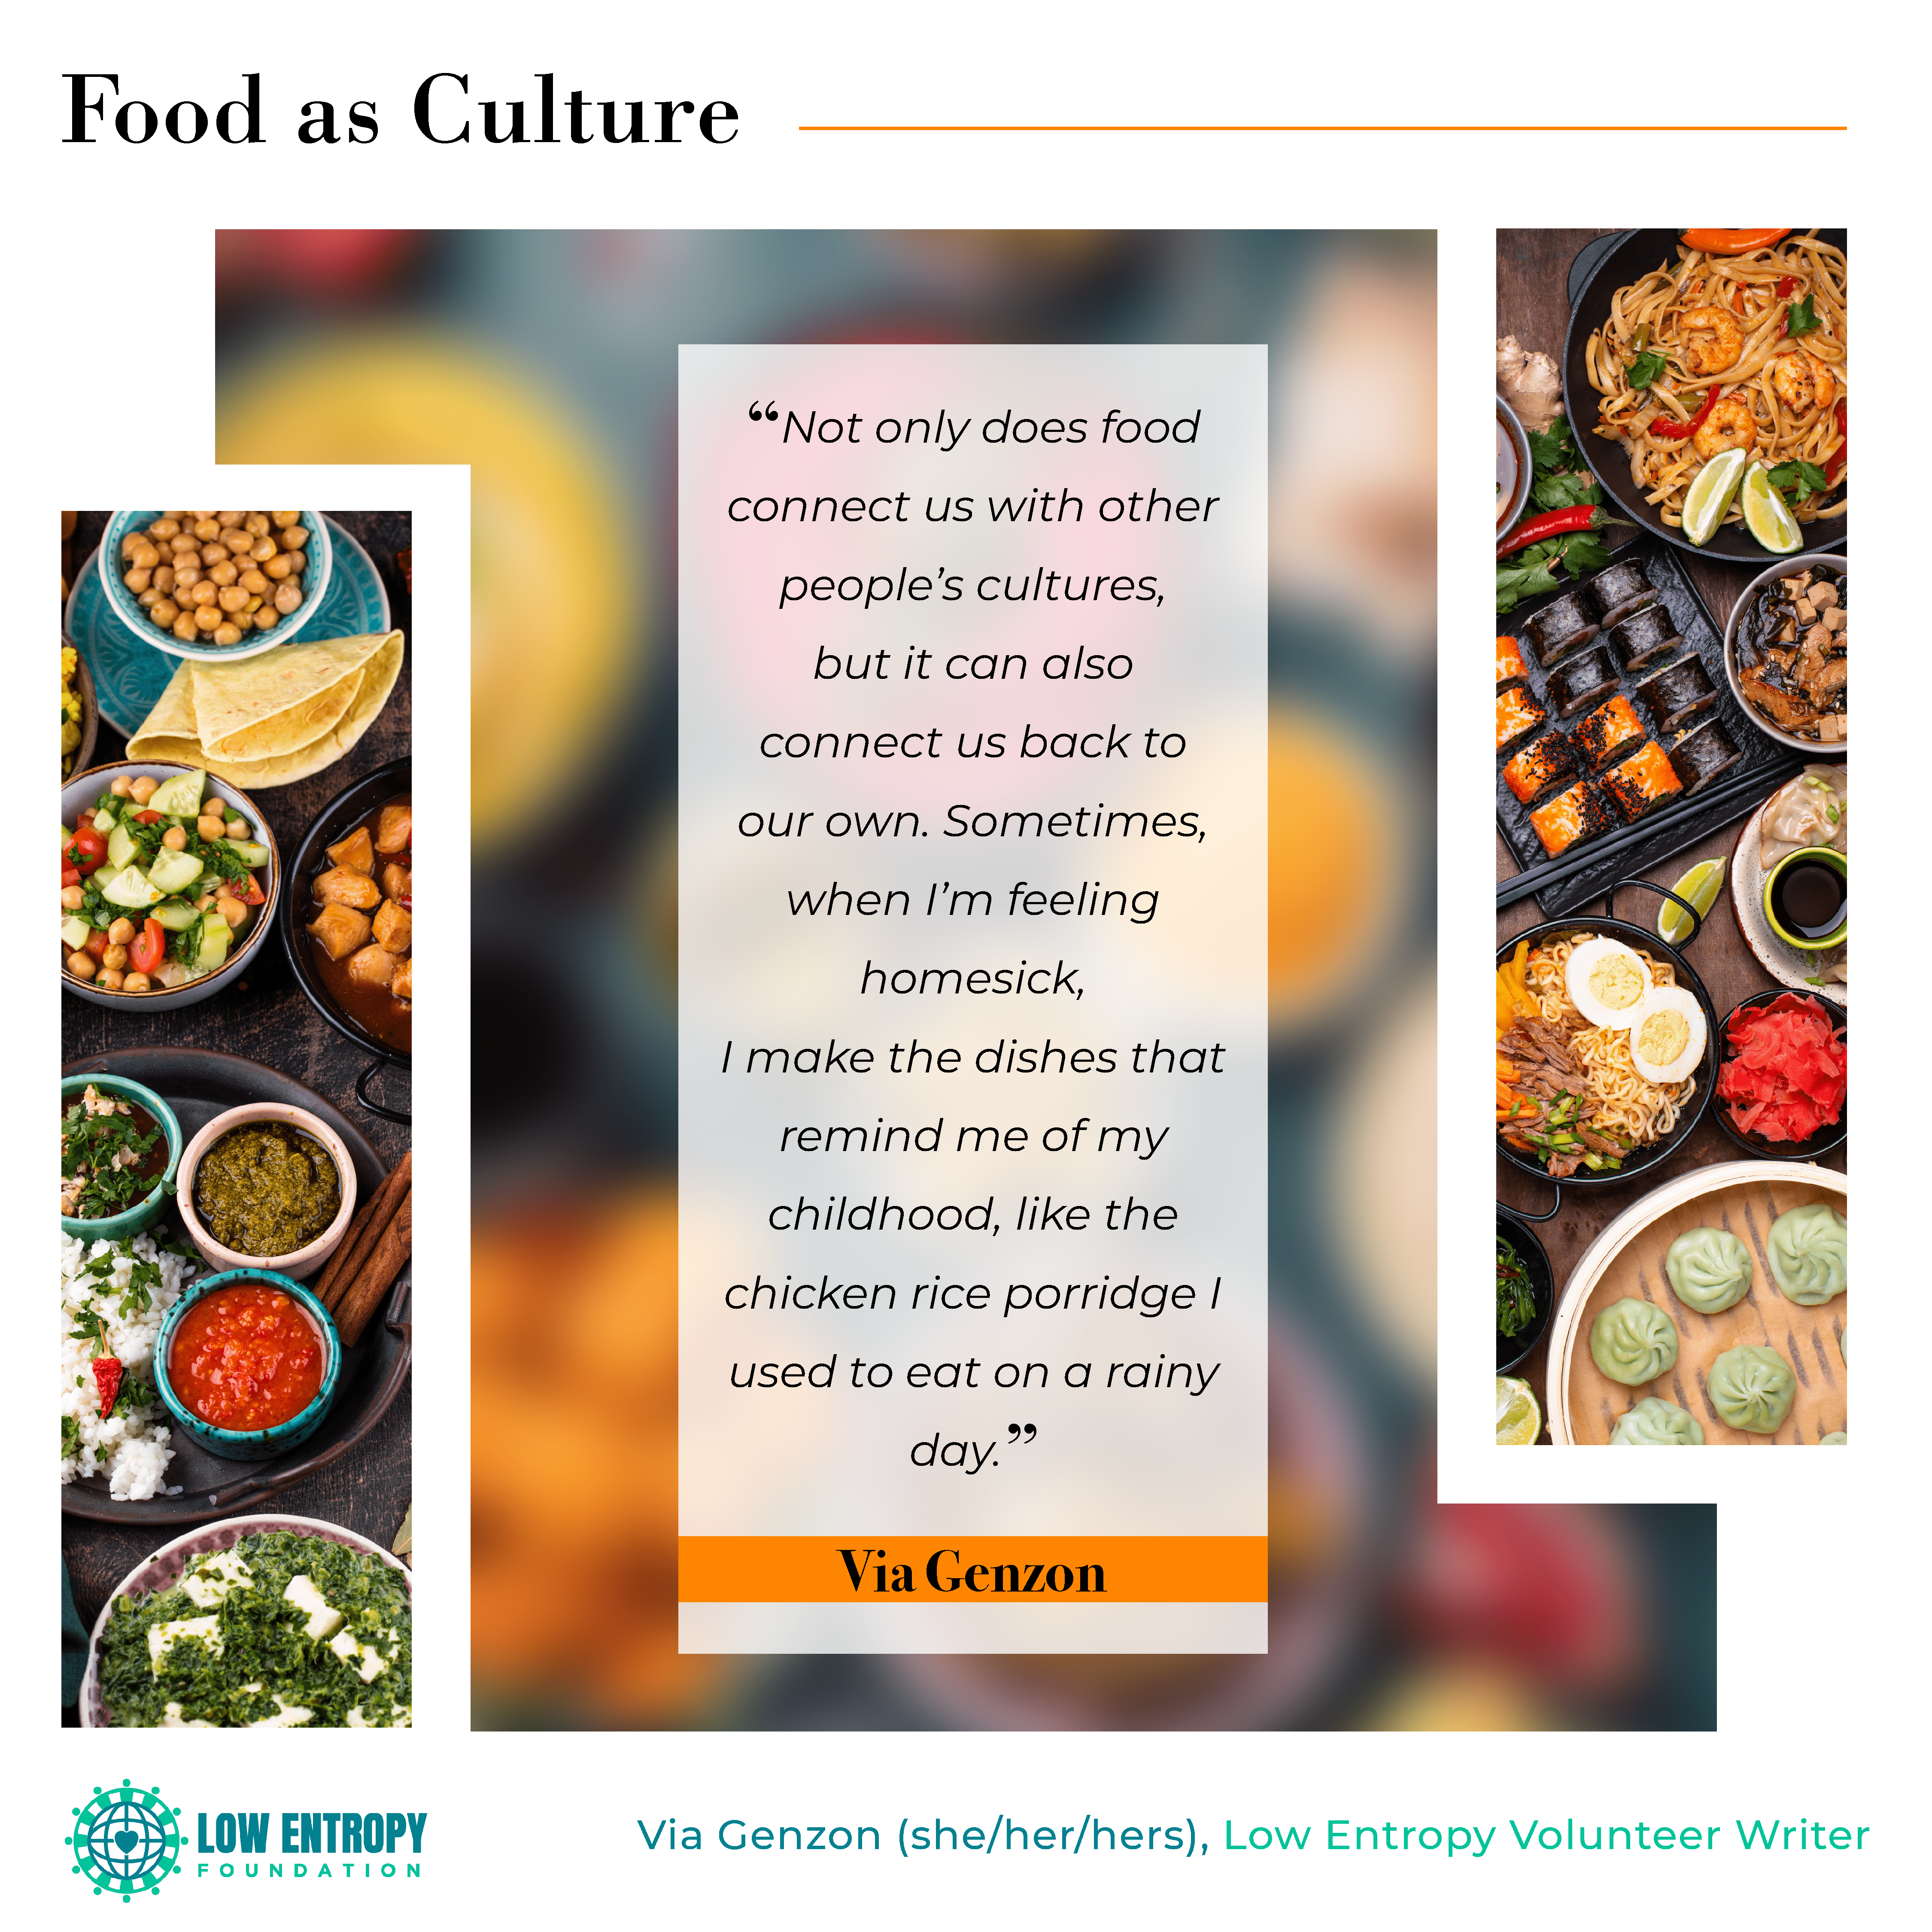 Food as Culture